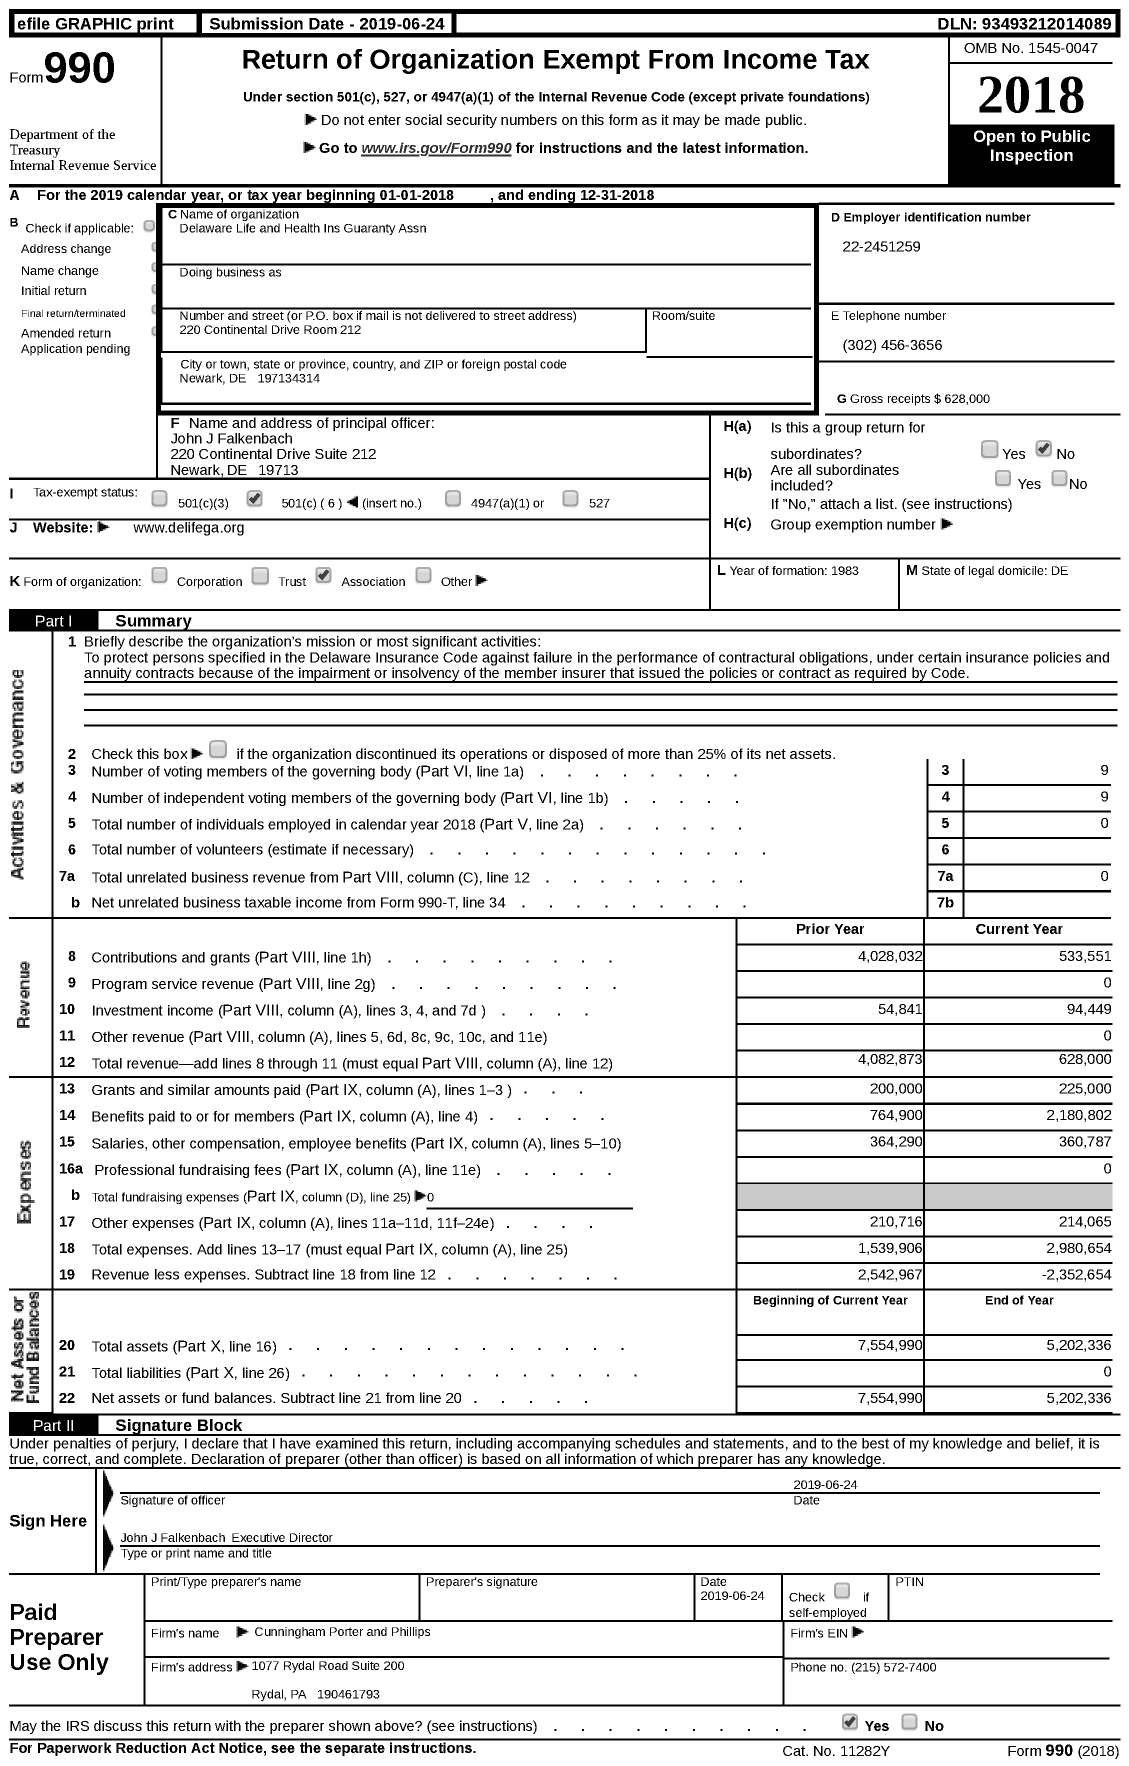 Image of first page of 2018 Form 990 for Delaware Life and Health Ins Guaranty Assn